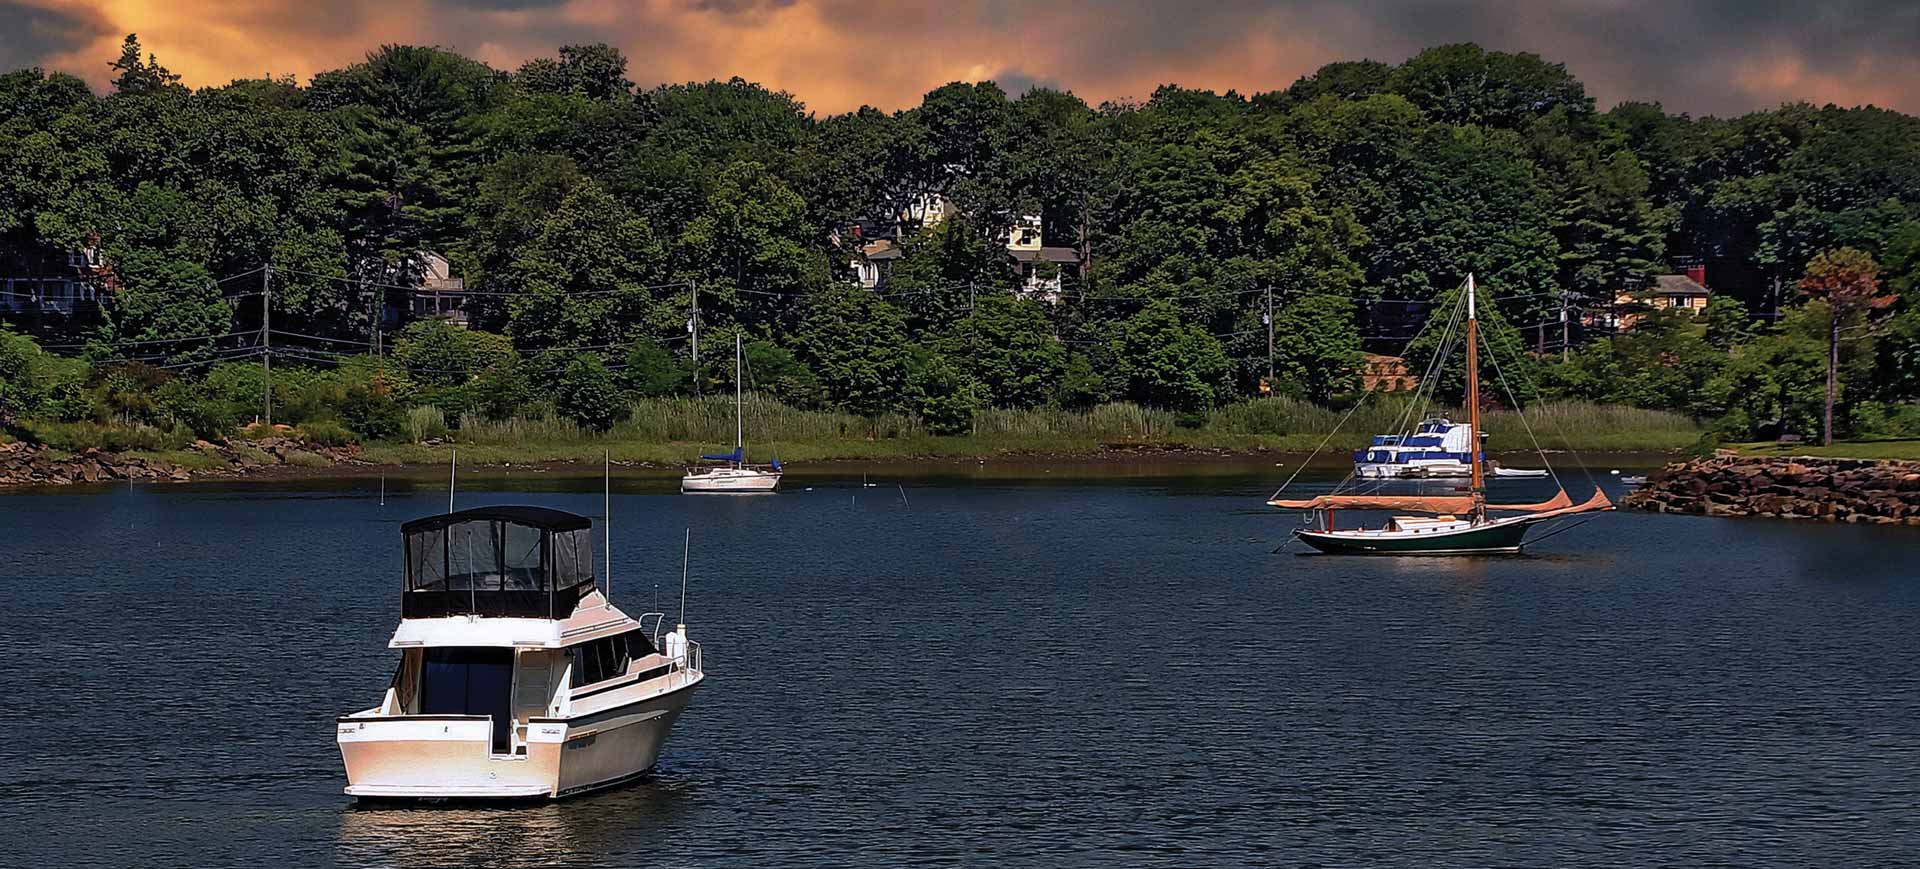 Boats anchored in the harbor near Greenwich, CT